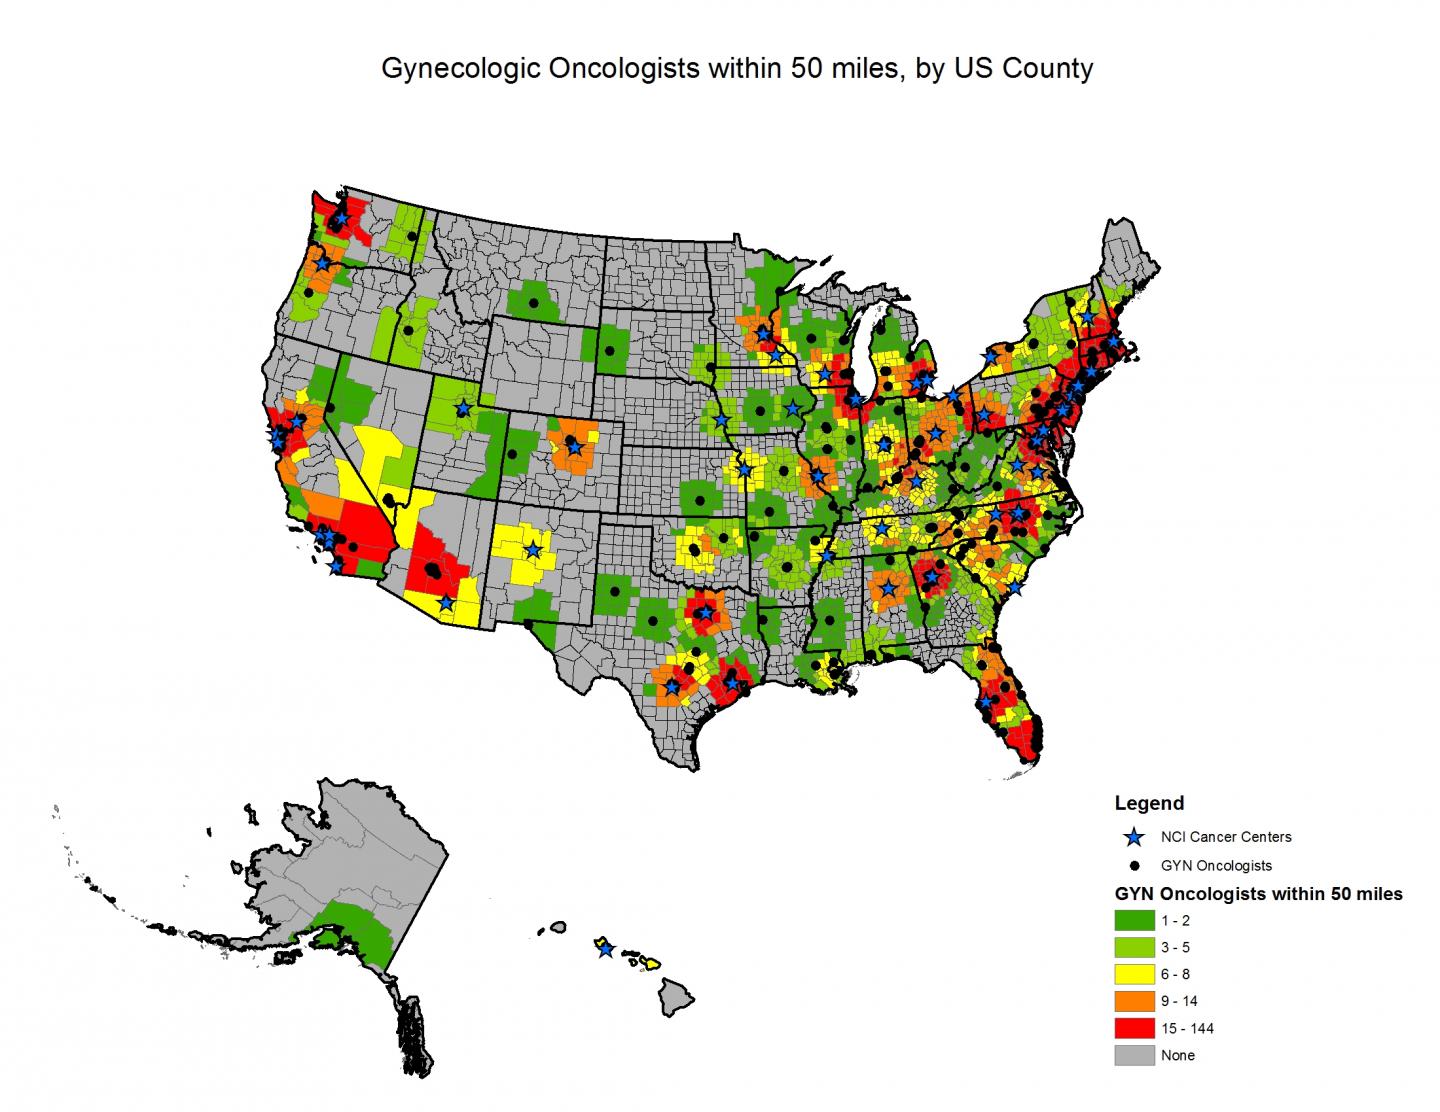 Gynecologic Oncologists within 50 Miles, by US County